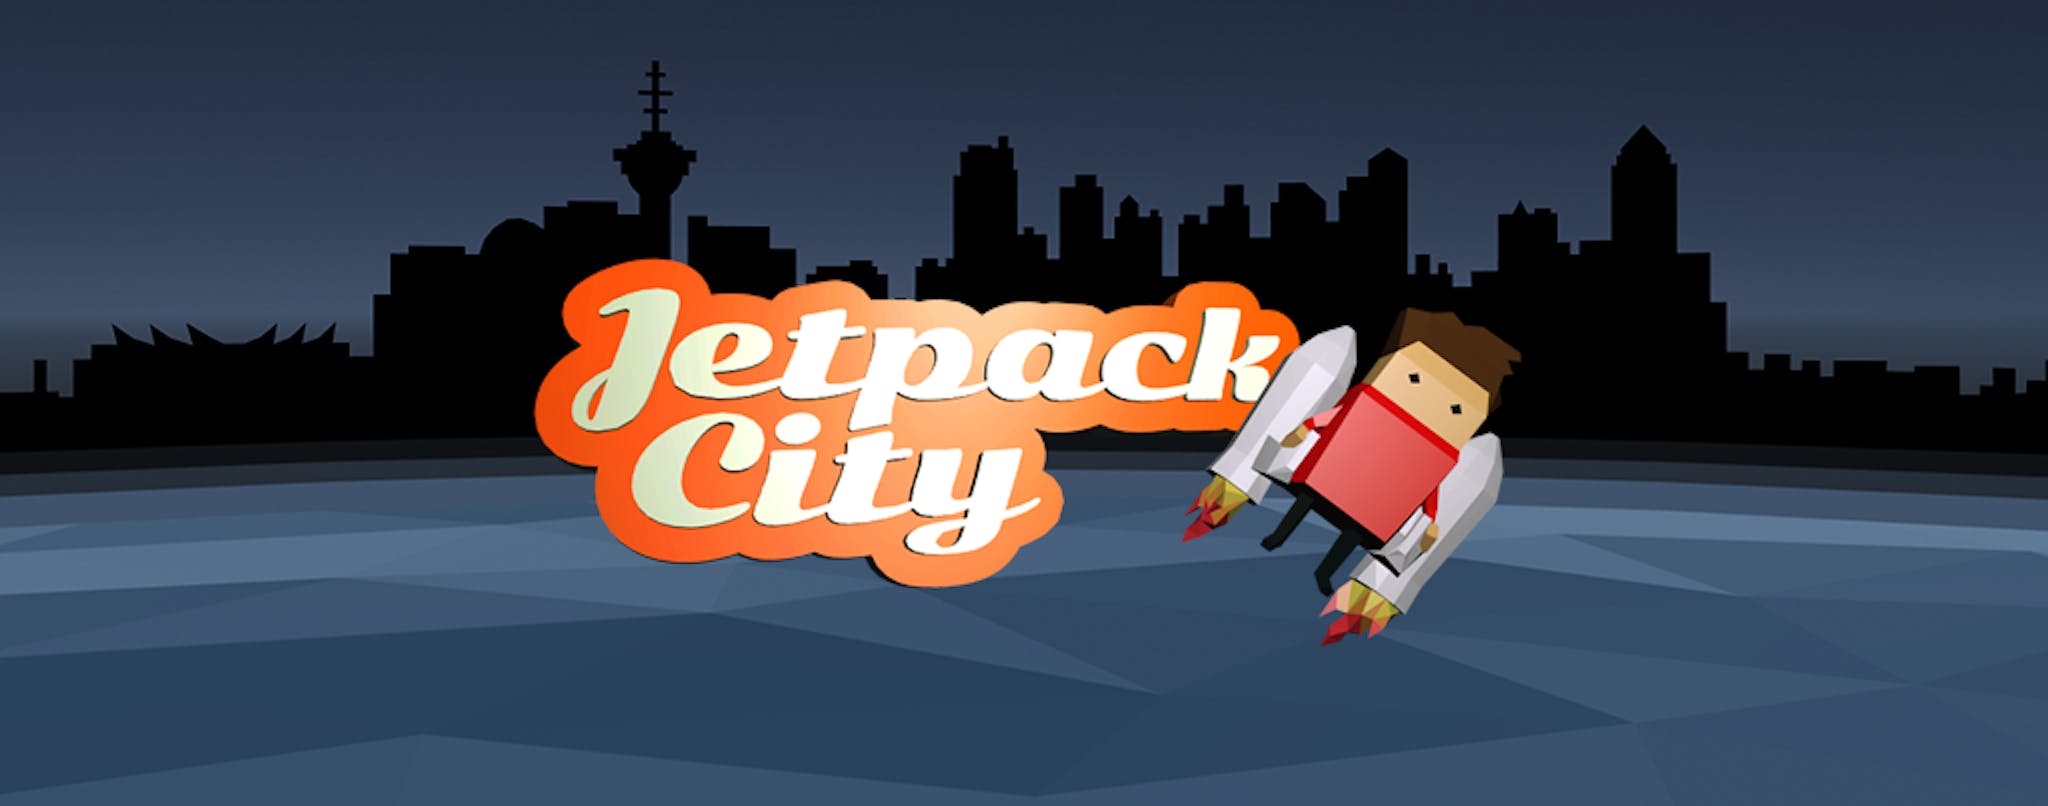 featured image - Jetpack City: A VR game jam project